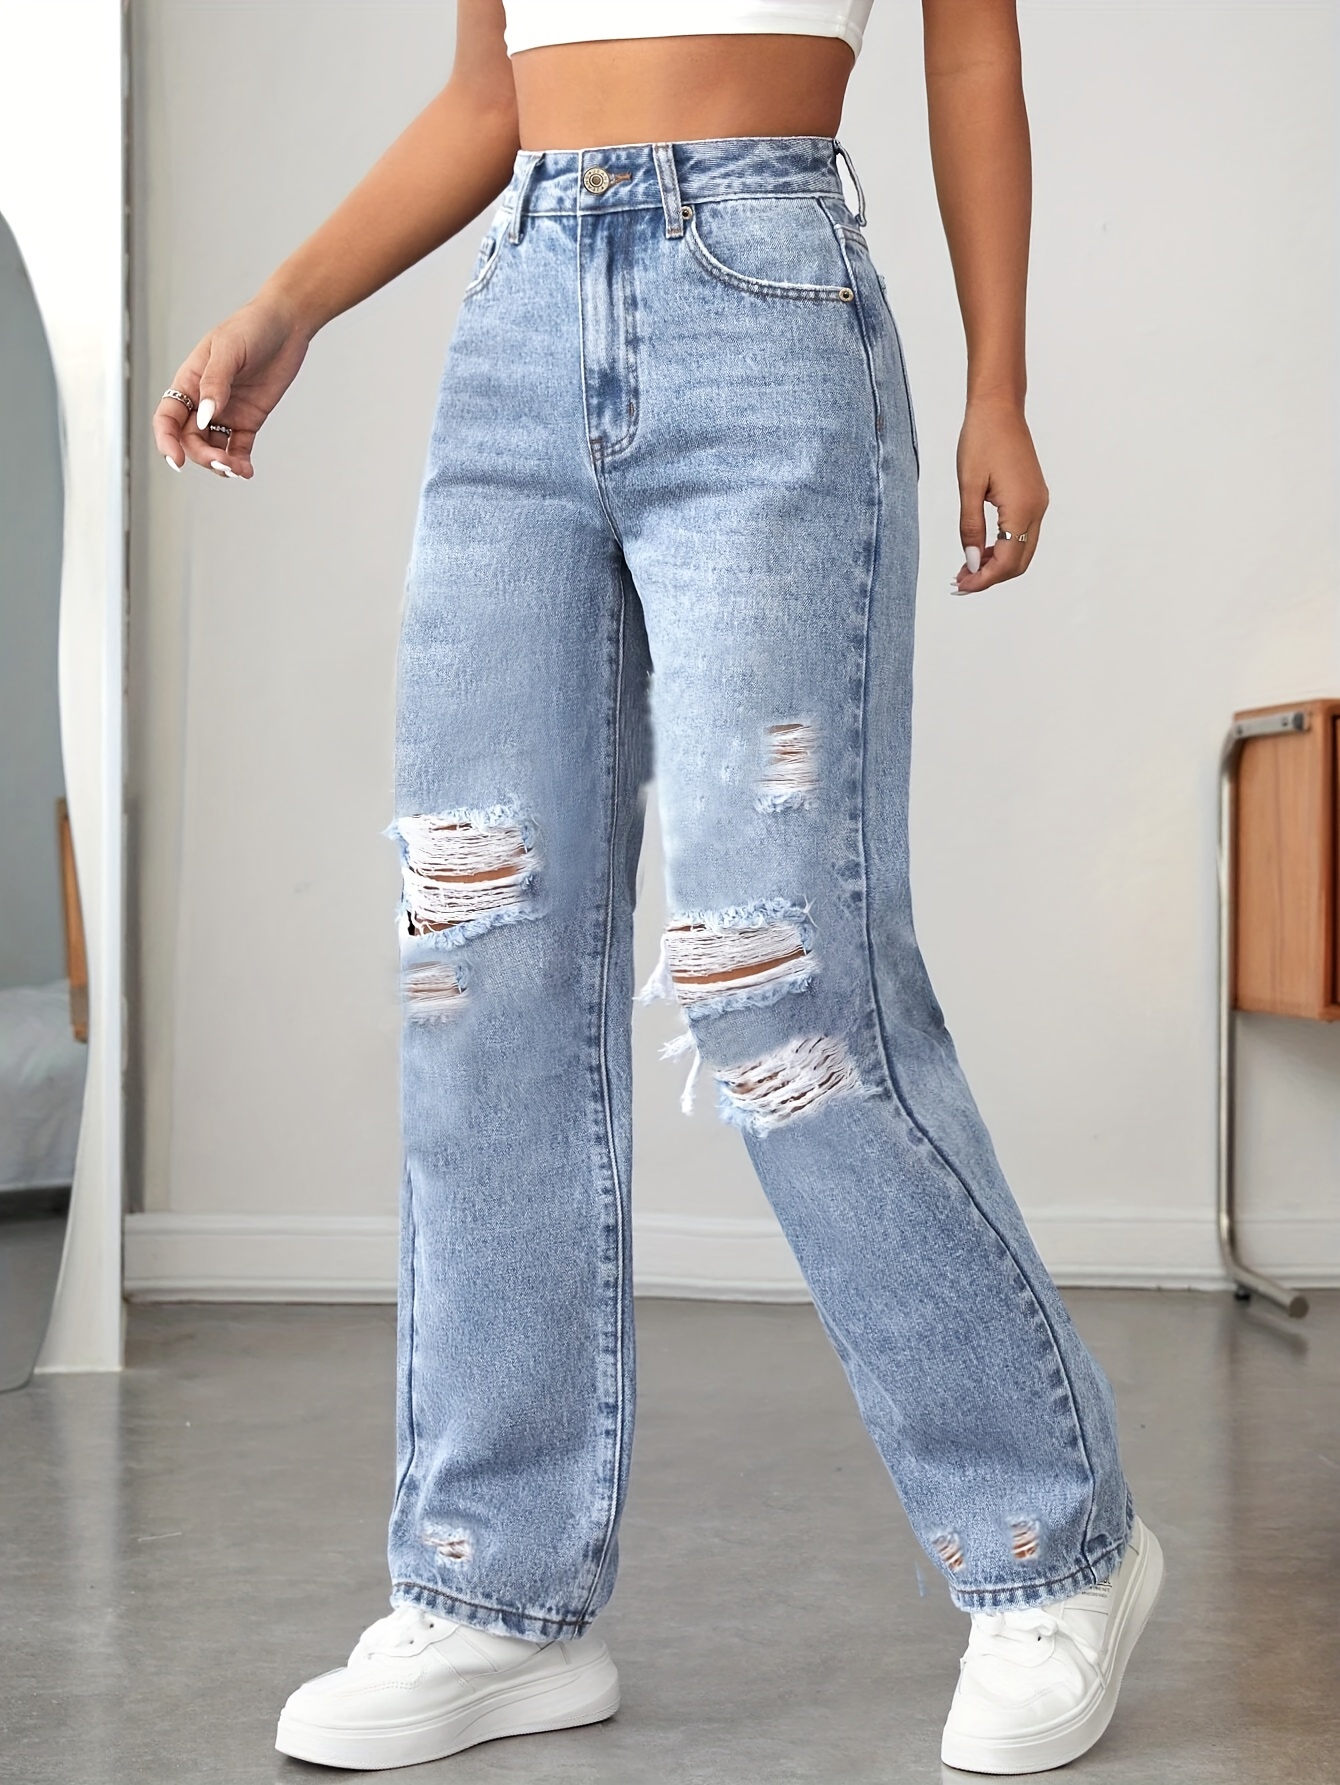 Women's Loose Fit Straight Leg Jeans with Multiple Pockets on Jean